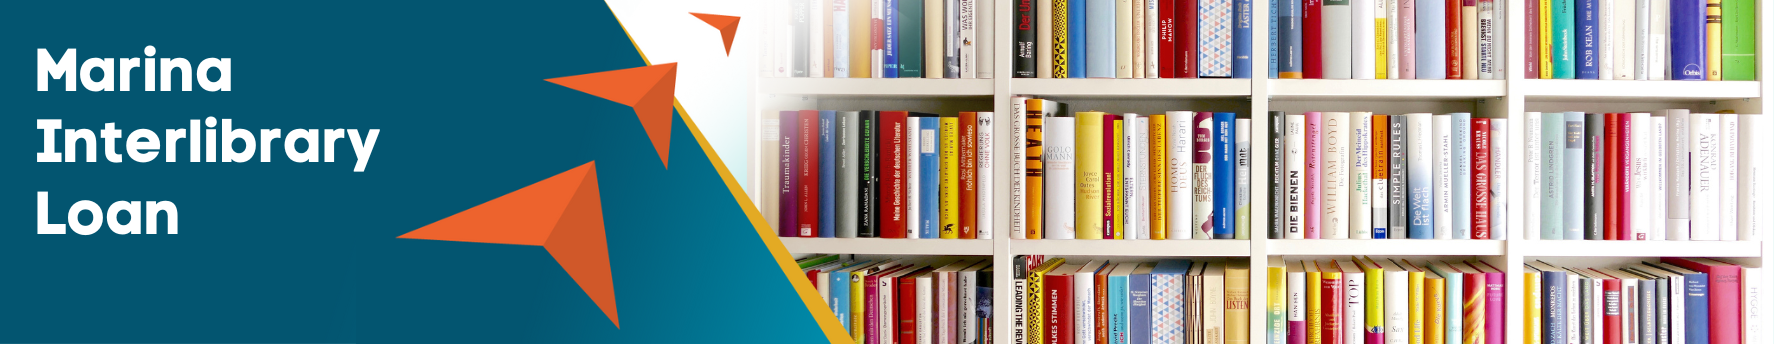 Marina Interlibrary Loan banner with three orange arrows pointing to shelves full of books.